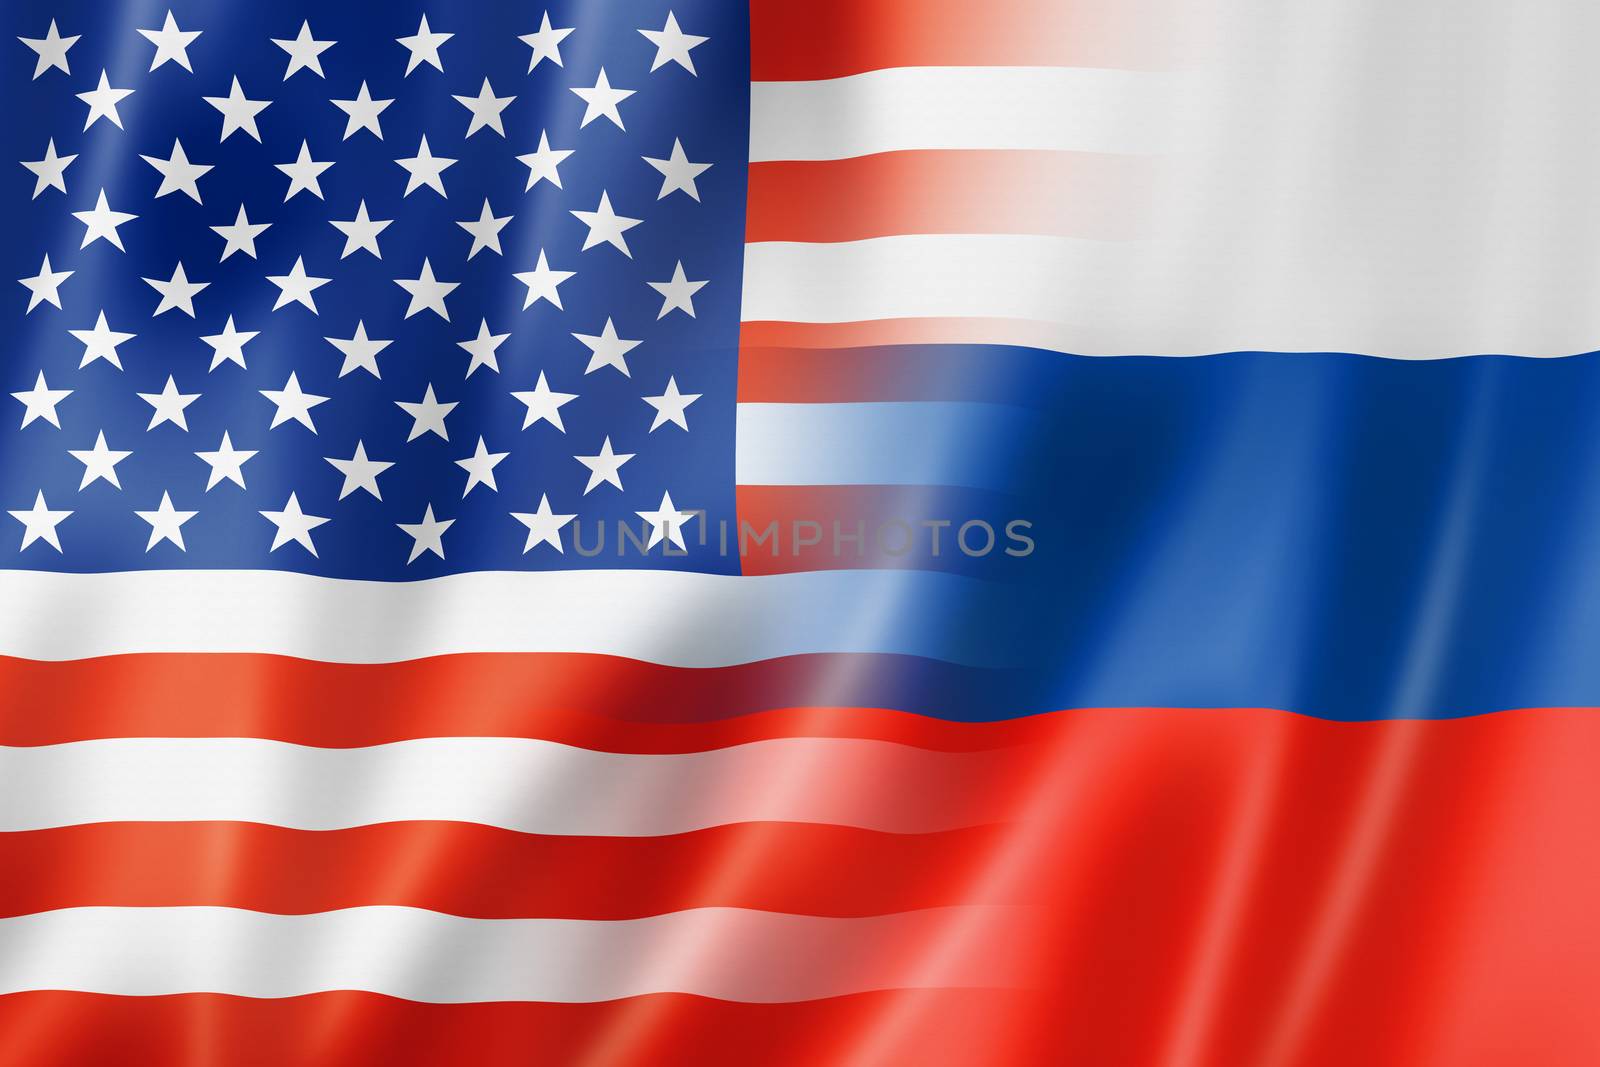 USA and Russia flag by daboost